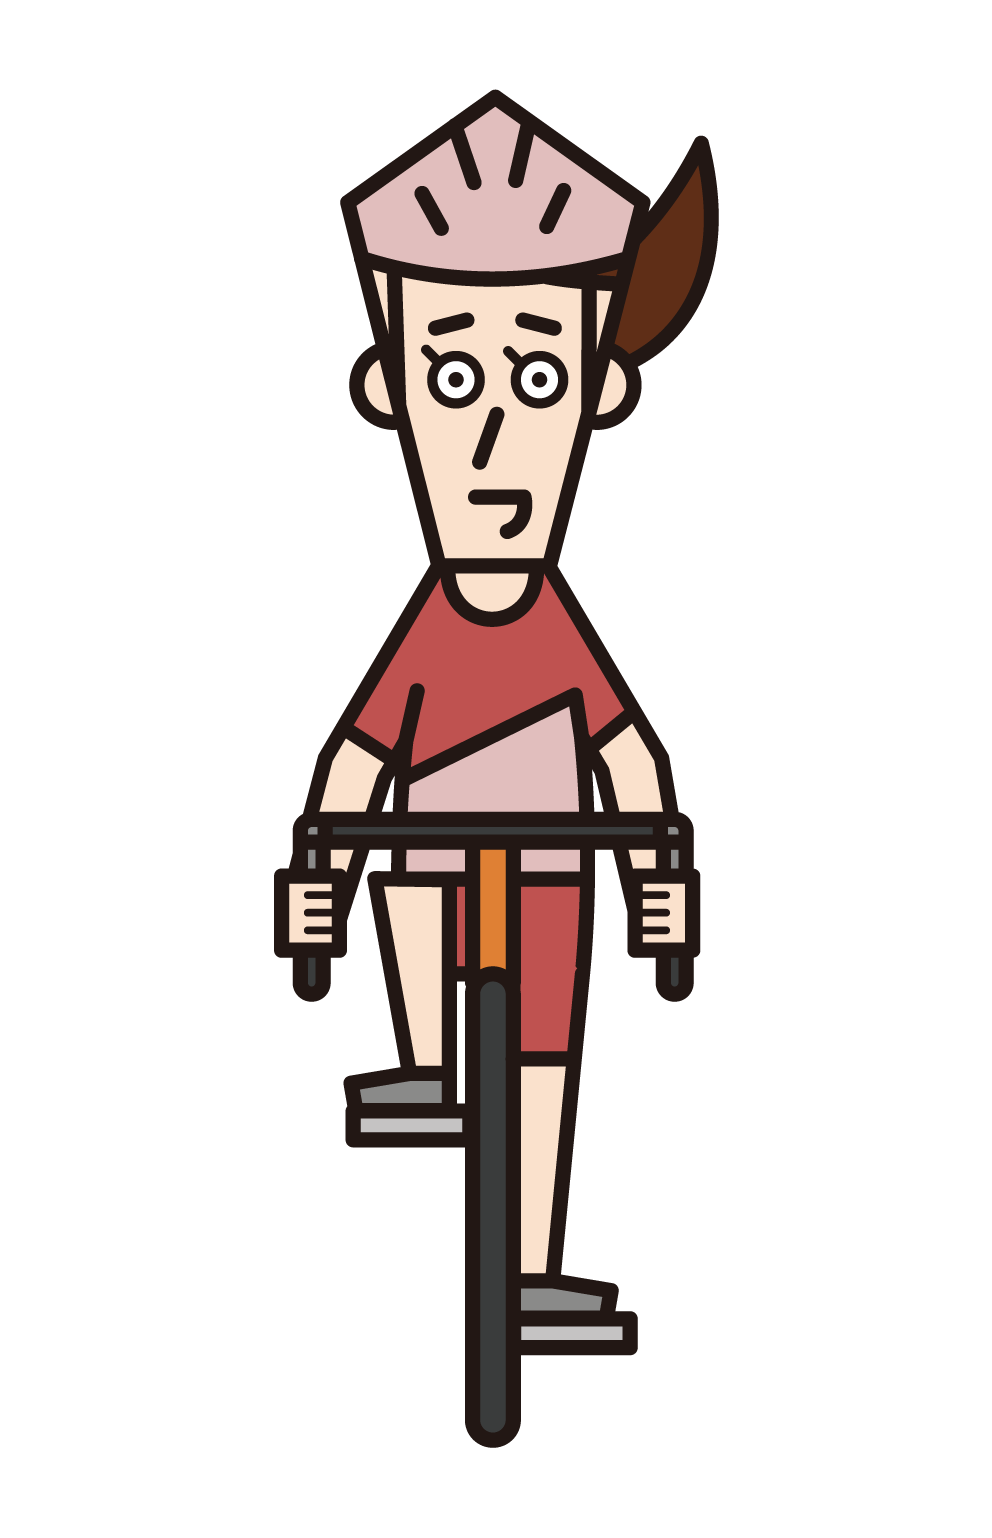 Illustration of a person (female) riding a road bike